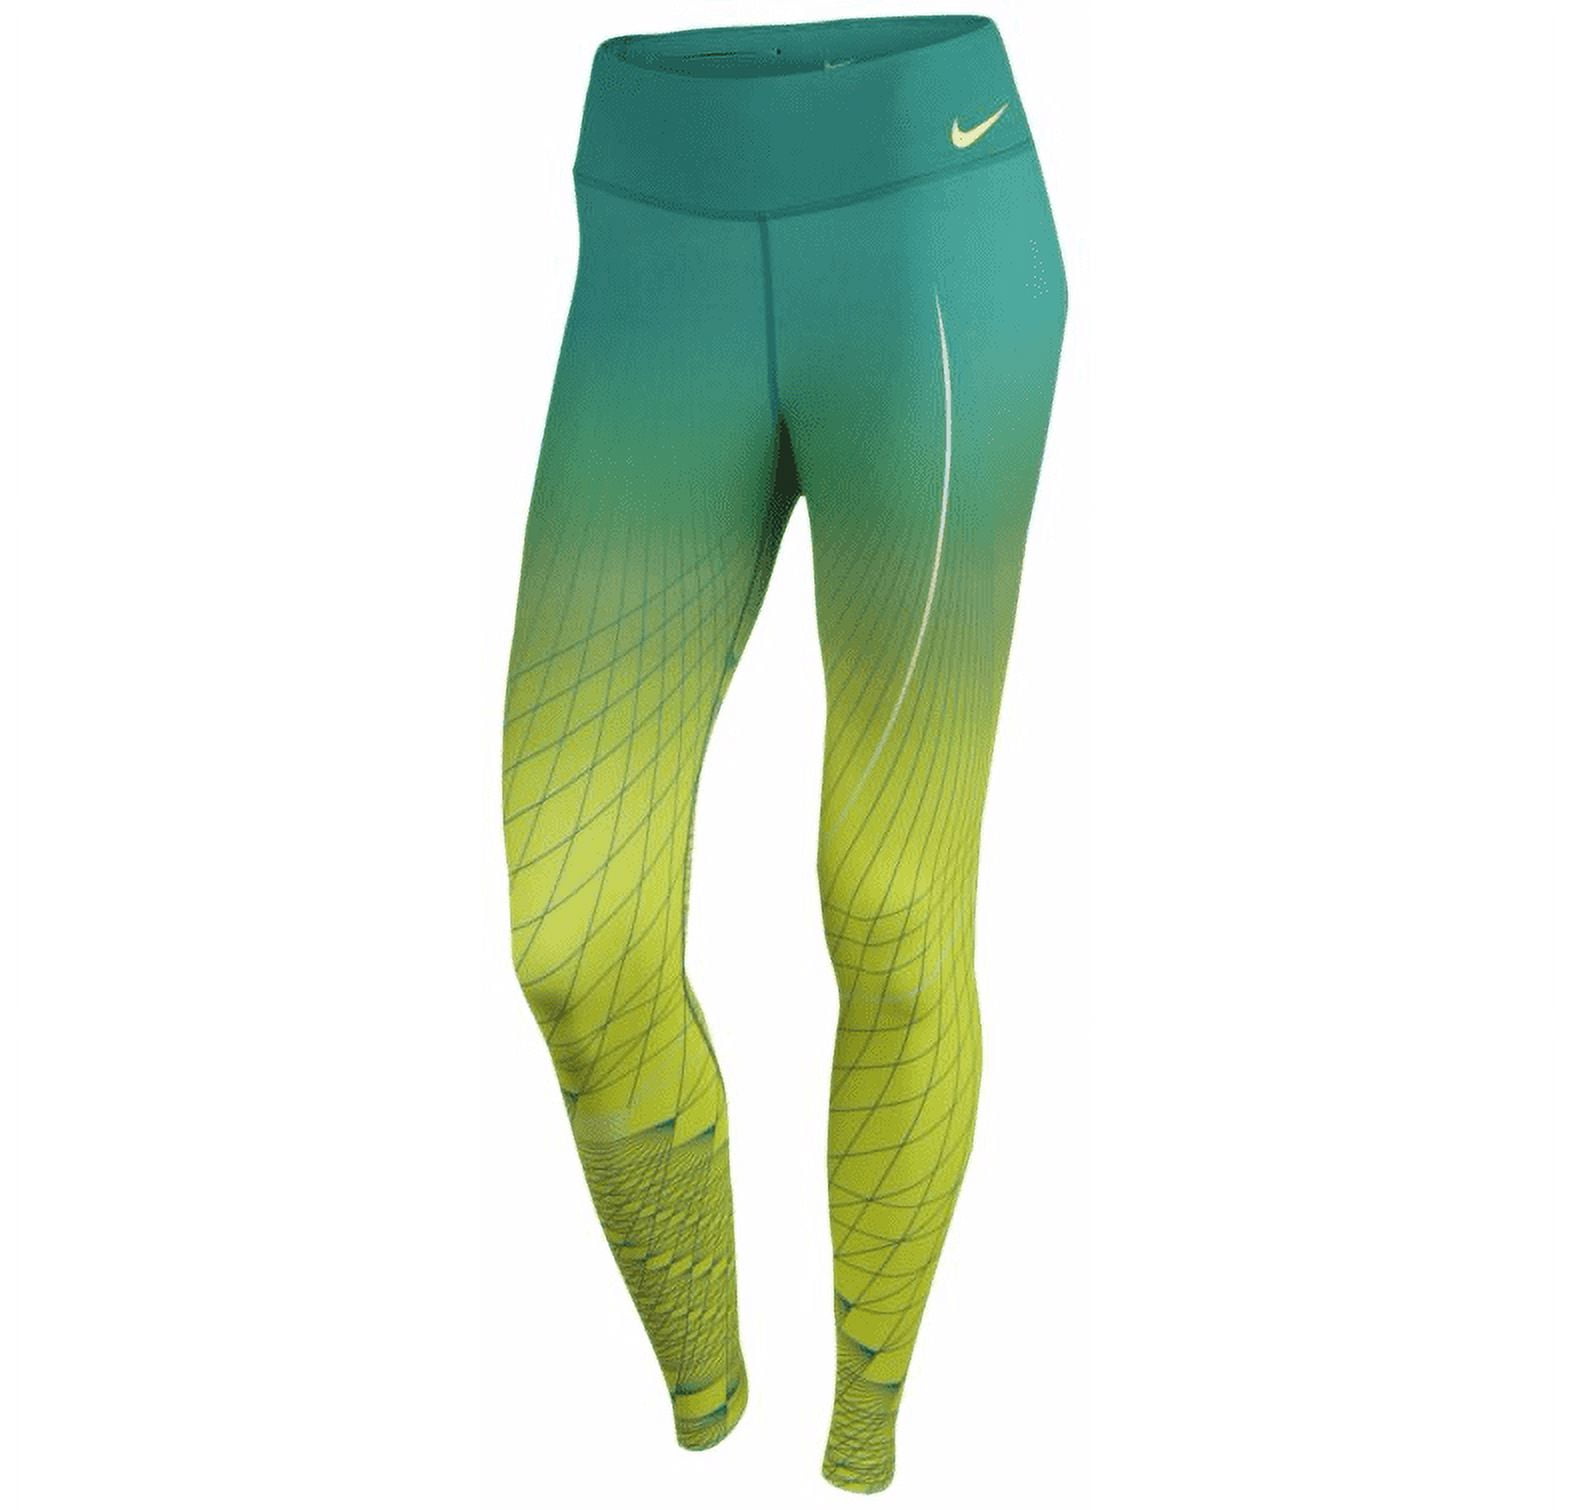 Womens Nike Power Legendary Engineered Tights Volt/Rio Teal